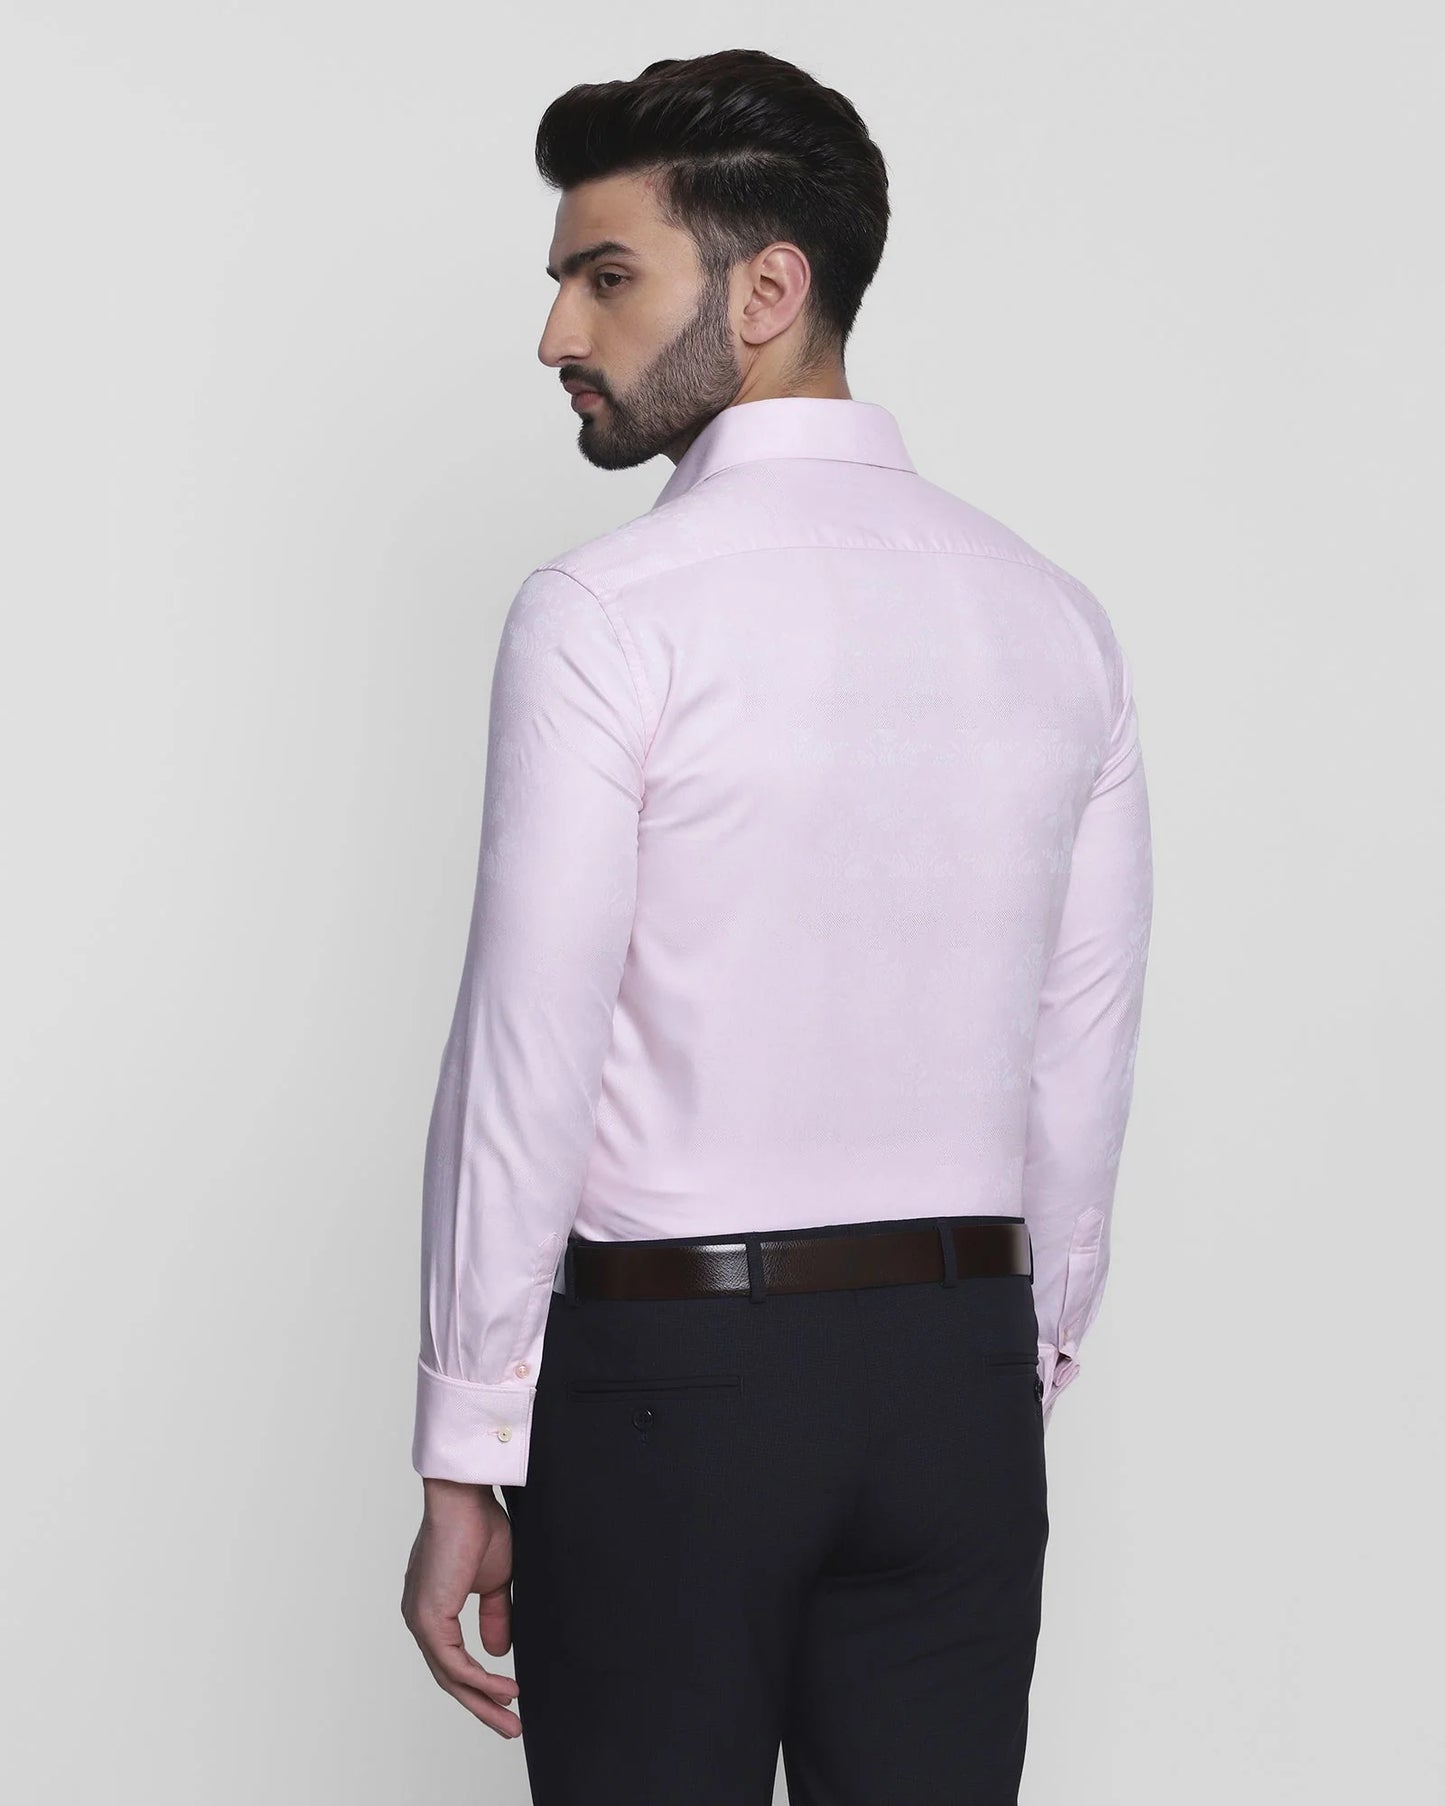 Solid formal shirt in pink